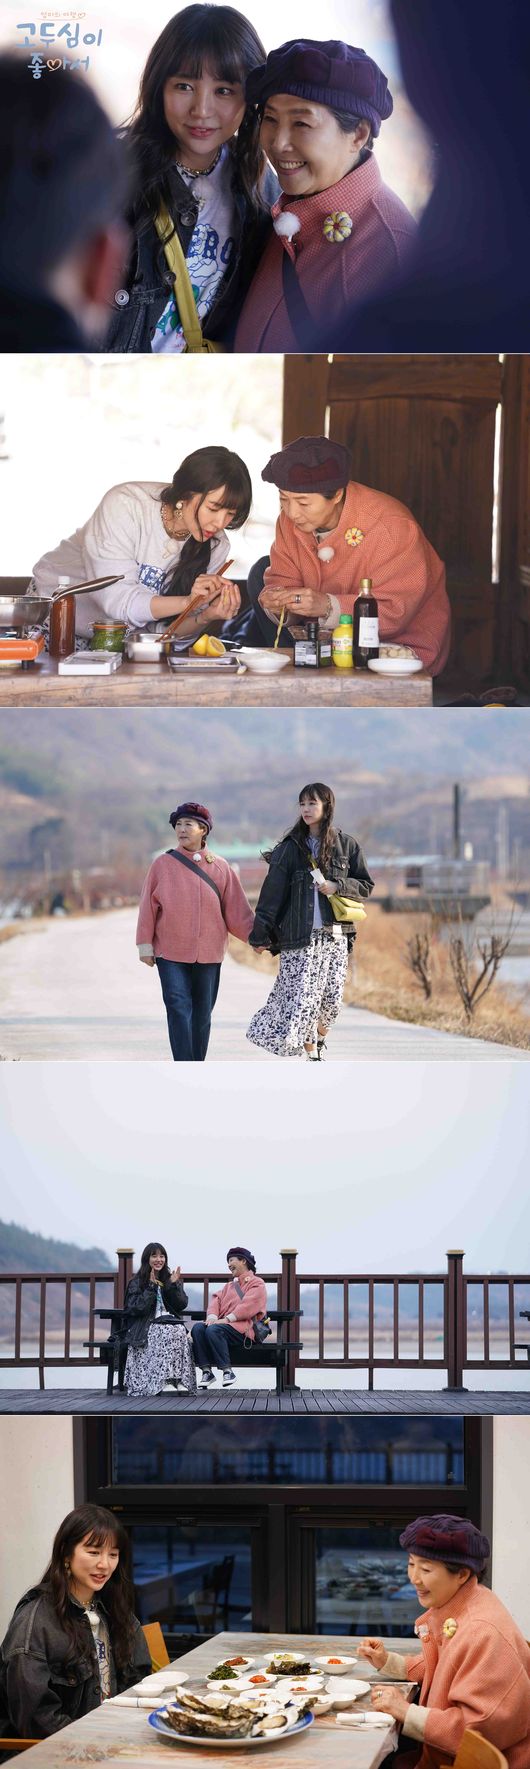 Actor Go Doo-shim and Yoon Eun-hye met.LG Hello Vision - Channel A co-production Moms Travel Go Doo-shim is good (hereinafter Go Doo-shim is good) will be the Slap in nine years by Go Doo-shim and Yoon Eun-hye.On the same day, Go Doo-shim invited Yoon Eun-hye, who had been breathing together at the future Choices nine years ago, as a travel mate of the plum.In nine years on the hill overlooking the stem of the Seomjin River, The Slap Go Doo-shim and Yoon Eun-hye were delighted to hug each other and circle around as soon as they met.Yoon Eun-hye, who started his career as a group baby Vox member in 1999 and became a Moonlighting Actor through Palace and Coffee Prince 1st Shop, has recently gained popularity as a personal broadcasting service that communicates with food.Go Doo-shim, who met Yoon Eun-hye, opened the conversation with an unexpected story that the two of them were all in the same place at the time of shooting Choices of the Future Drama.When Yoon Eun-hye said, I was so focused on acting as CEO that I wanted to talk to you, but I gave up. Go Doo-shim laughed, saying, I was wearing my body pants and playing the role of a mother.Go Doo-shim, who recently revealed on TV that he wanted to talk to Yoon Eun-hye because he thought she was a young, pretty, cooking and well-known woman, spent a special time in Gwangyang.# The fragrant relationship I met in Gwangyang Plum VillageThe representative spring flower attraction in Gwangyang is Plum Village with 100,000 plum trees.The walkway, which is decorated with plum blossoms, is enchanting to walk with a bright red plum, clear and clean white plum, and sweet plum plum.Here is another reason why Go Doo-shim visited the plum village with Yoon Eun-hye.To meet Hong Sang-ri plum master who has been in a relationship for 32 years.Hong Sang-ri, who has a belief that he will eat meals for the guests who have come, is the back door that he carefully prepared traditional Korean dishes such as spring mugwort soup and herb side dishes and beef, which Go Doo-shim likes.# Moonlighting recipe for the grandchildren of Go Doo-shim gracious cooking classI wanted to cook for my grandchildren, but I want to learn cooking from grace through this opportunity because I am lacking in skills. Go Doo-shim has another self-interest of Travel.As if to respond to such expectations, Yoon Eun-hye makes a new fun in addition to the travel that he sees and enjoys by making True Festo Pasta with Go Doo-shim and handing over the cooking method in the plum village.# When spring comes to Gwangyang, the seamjin River blooms cherry oystersThe Mangdeok Port, where Seomjin River meets the South Sea, is famous for its springtime holy place in Gwangyang.The cherry oyster, which is huge in size and full of chubby and chewy flesh, is just in season.From a chance meeting with a diver who collects cherry oysters in Mangdeokpo-gu to a cherry oyster steaming and a tasting of a pick-up soup representing Gwangyang .. Go Doo-shim and Yoon Eun-hye, who enjoyed the taste of spring properly, spend a meaningful time approaching each other with their mother and daughter-like chemistry through the Slap for a long time.I hope that my moms will have a free and relaxed healing time is because I like my mothers Travel Go Doo-shim, which contains Go Doo-shims aspirations.Gwangyang Spring Outing Travel, which left with Yoon Eun-hye, will be on March 27th and Sunday at 7:50 pm on LG Hello Vision 25 channel and Channel A